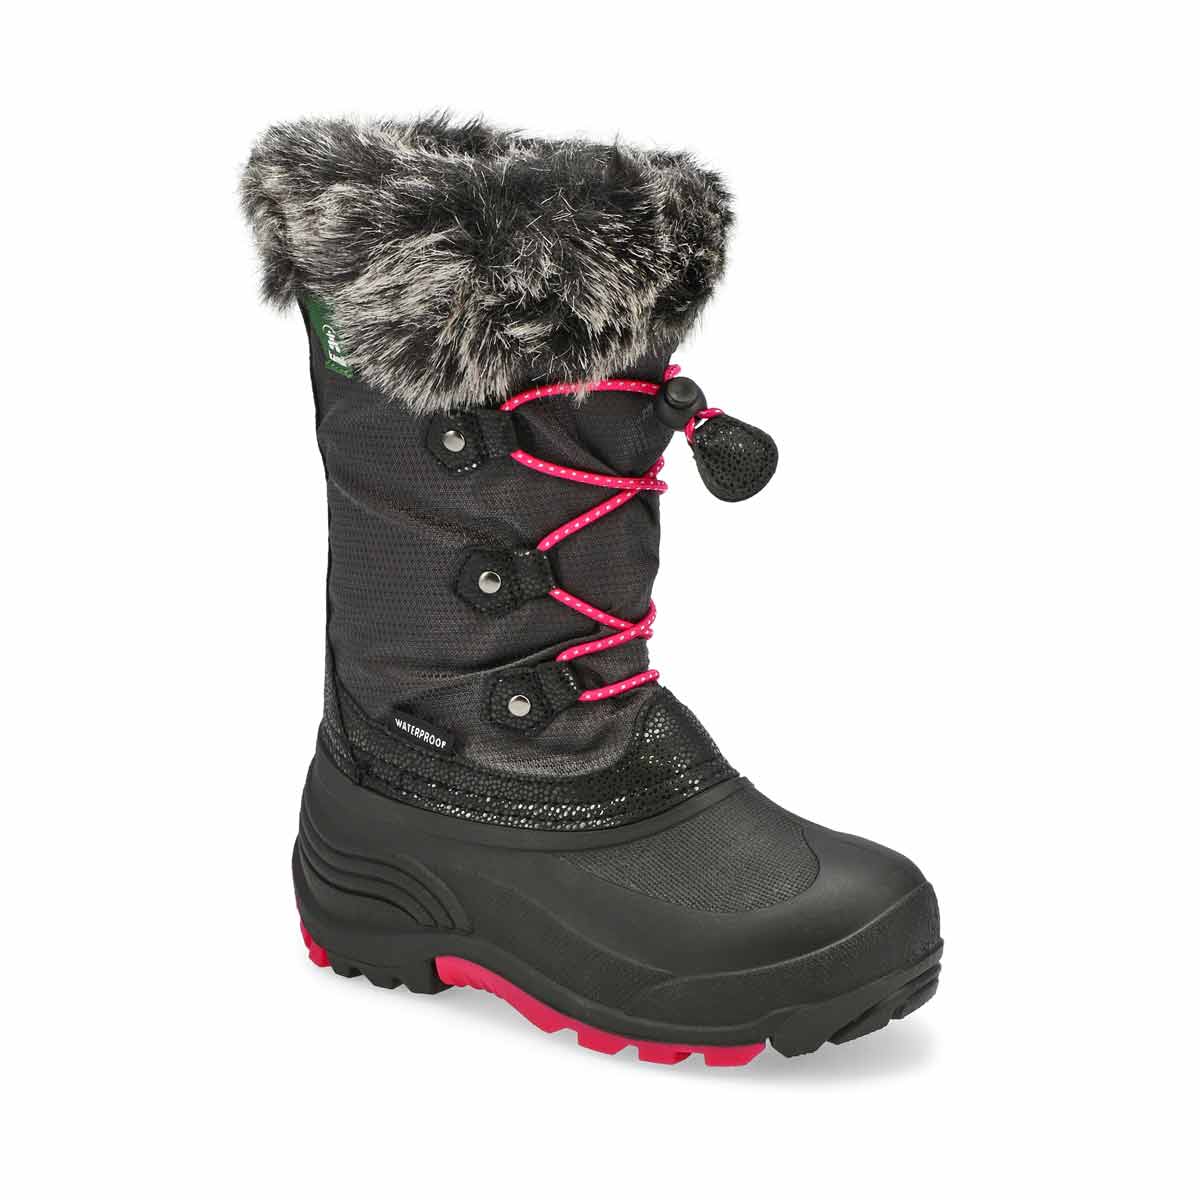 Botte d'hiver imp. POWDERY 2, anthracite, fille